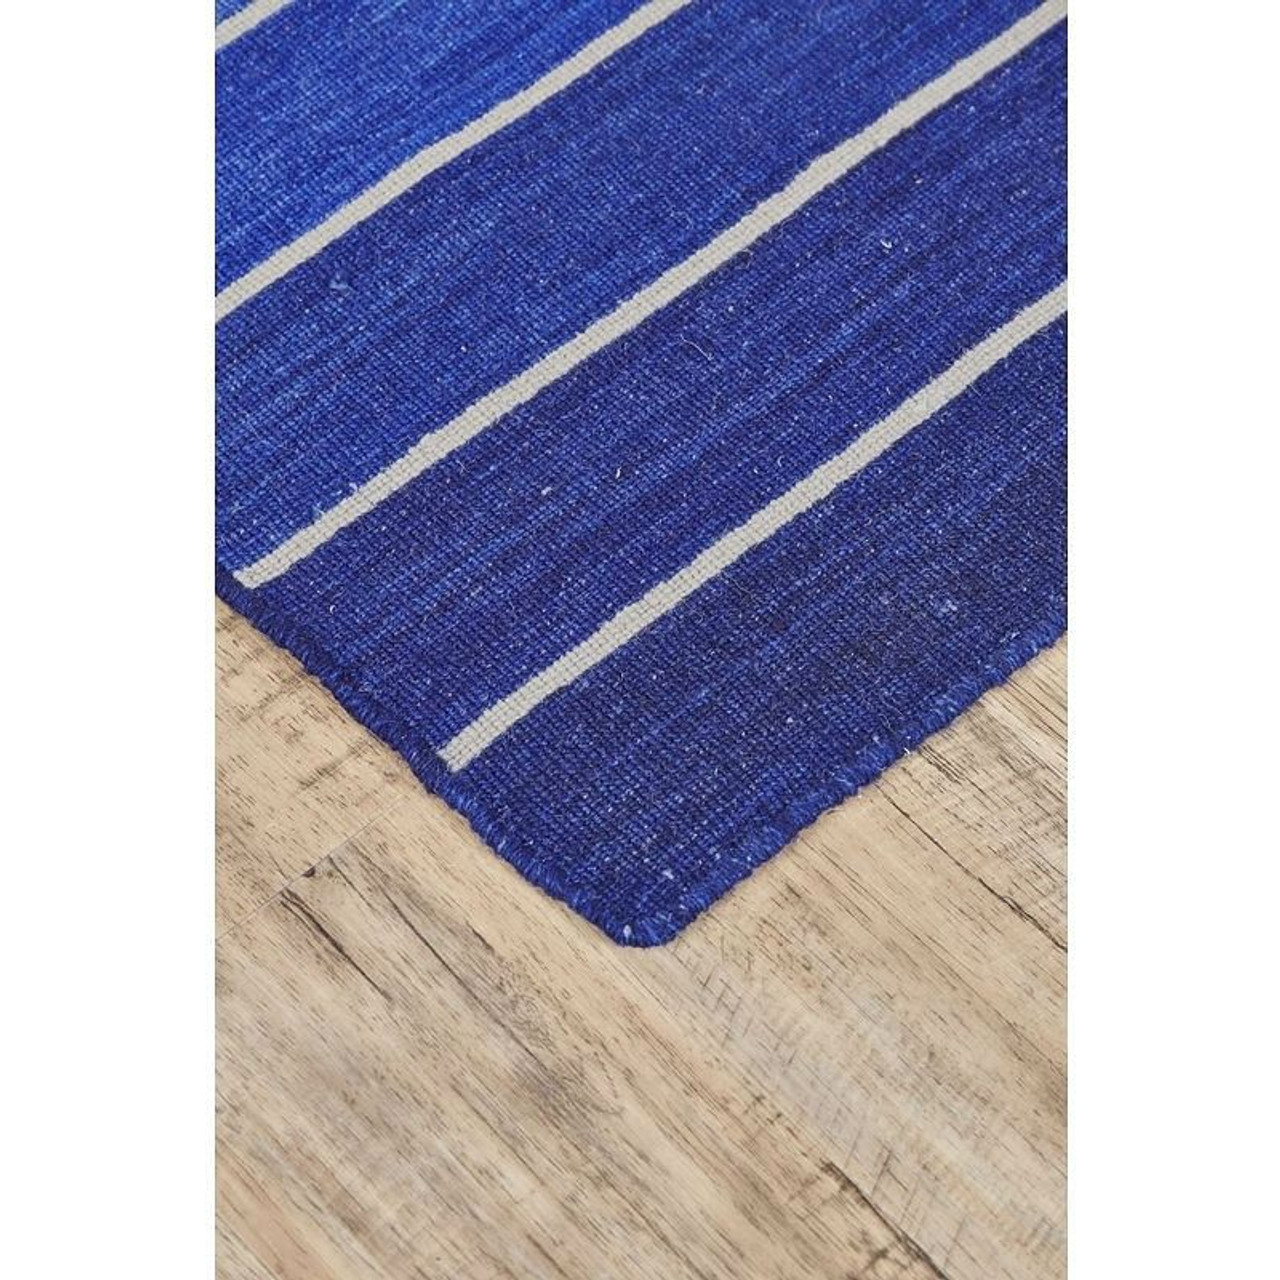 8' x 11' Striped Hand-Tufted Wool/Cotton Blue Area Rug